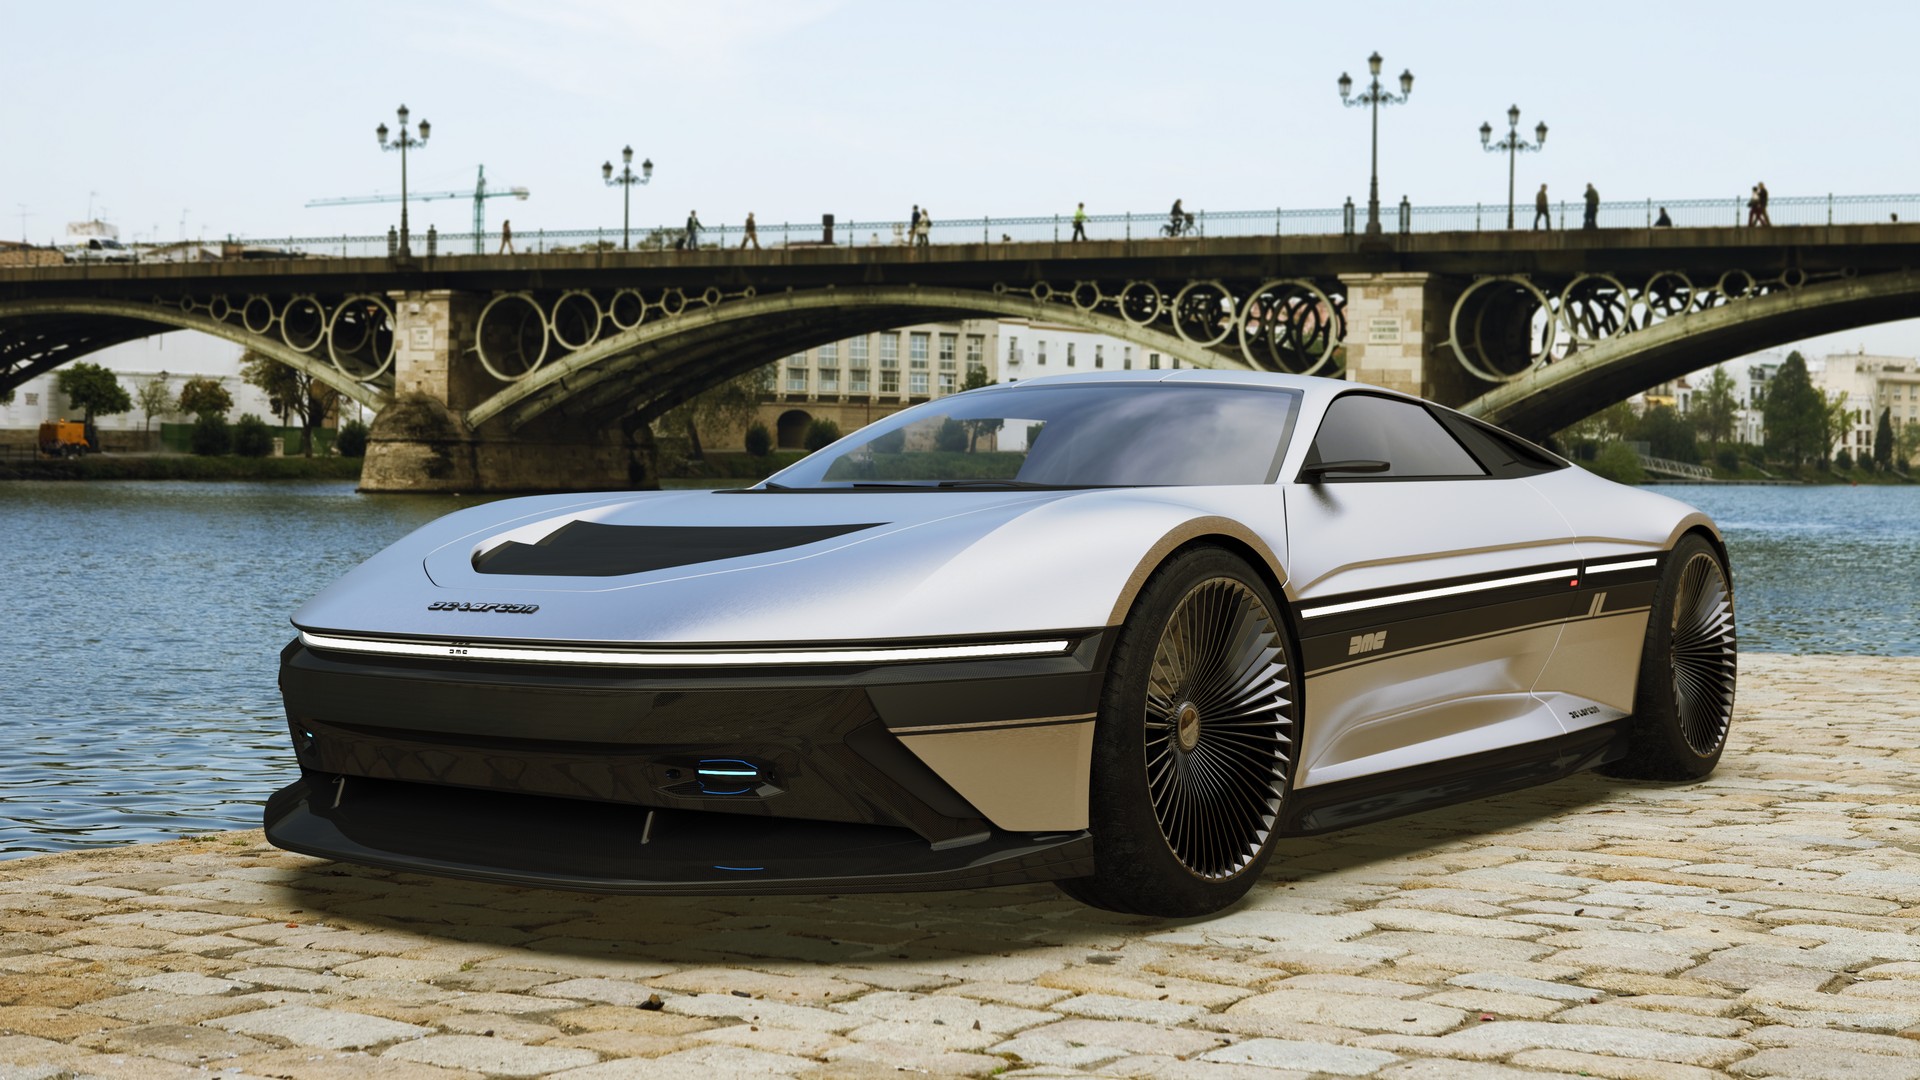 This Modern Day Take On The Delorean Dmc 12 Is A Futuristic Ev Wrapped In Stylish Stainless Steel Carscoops